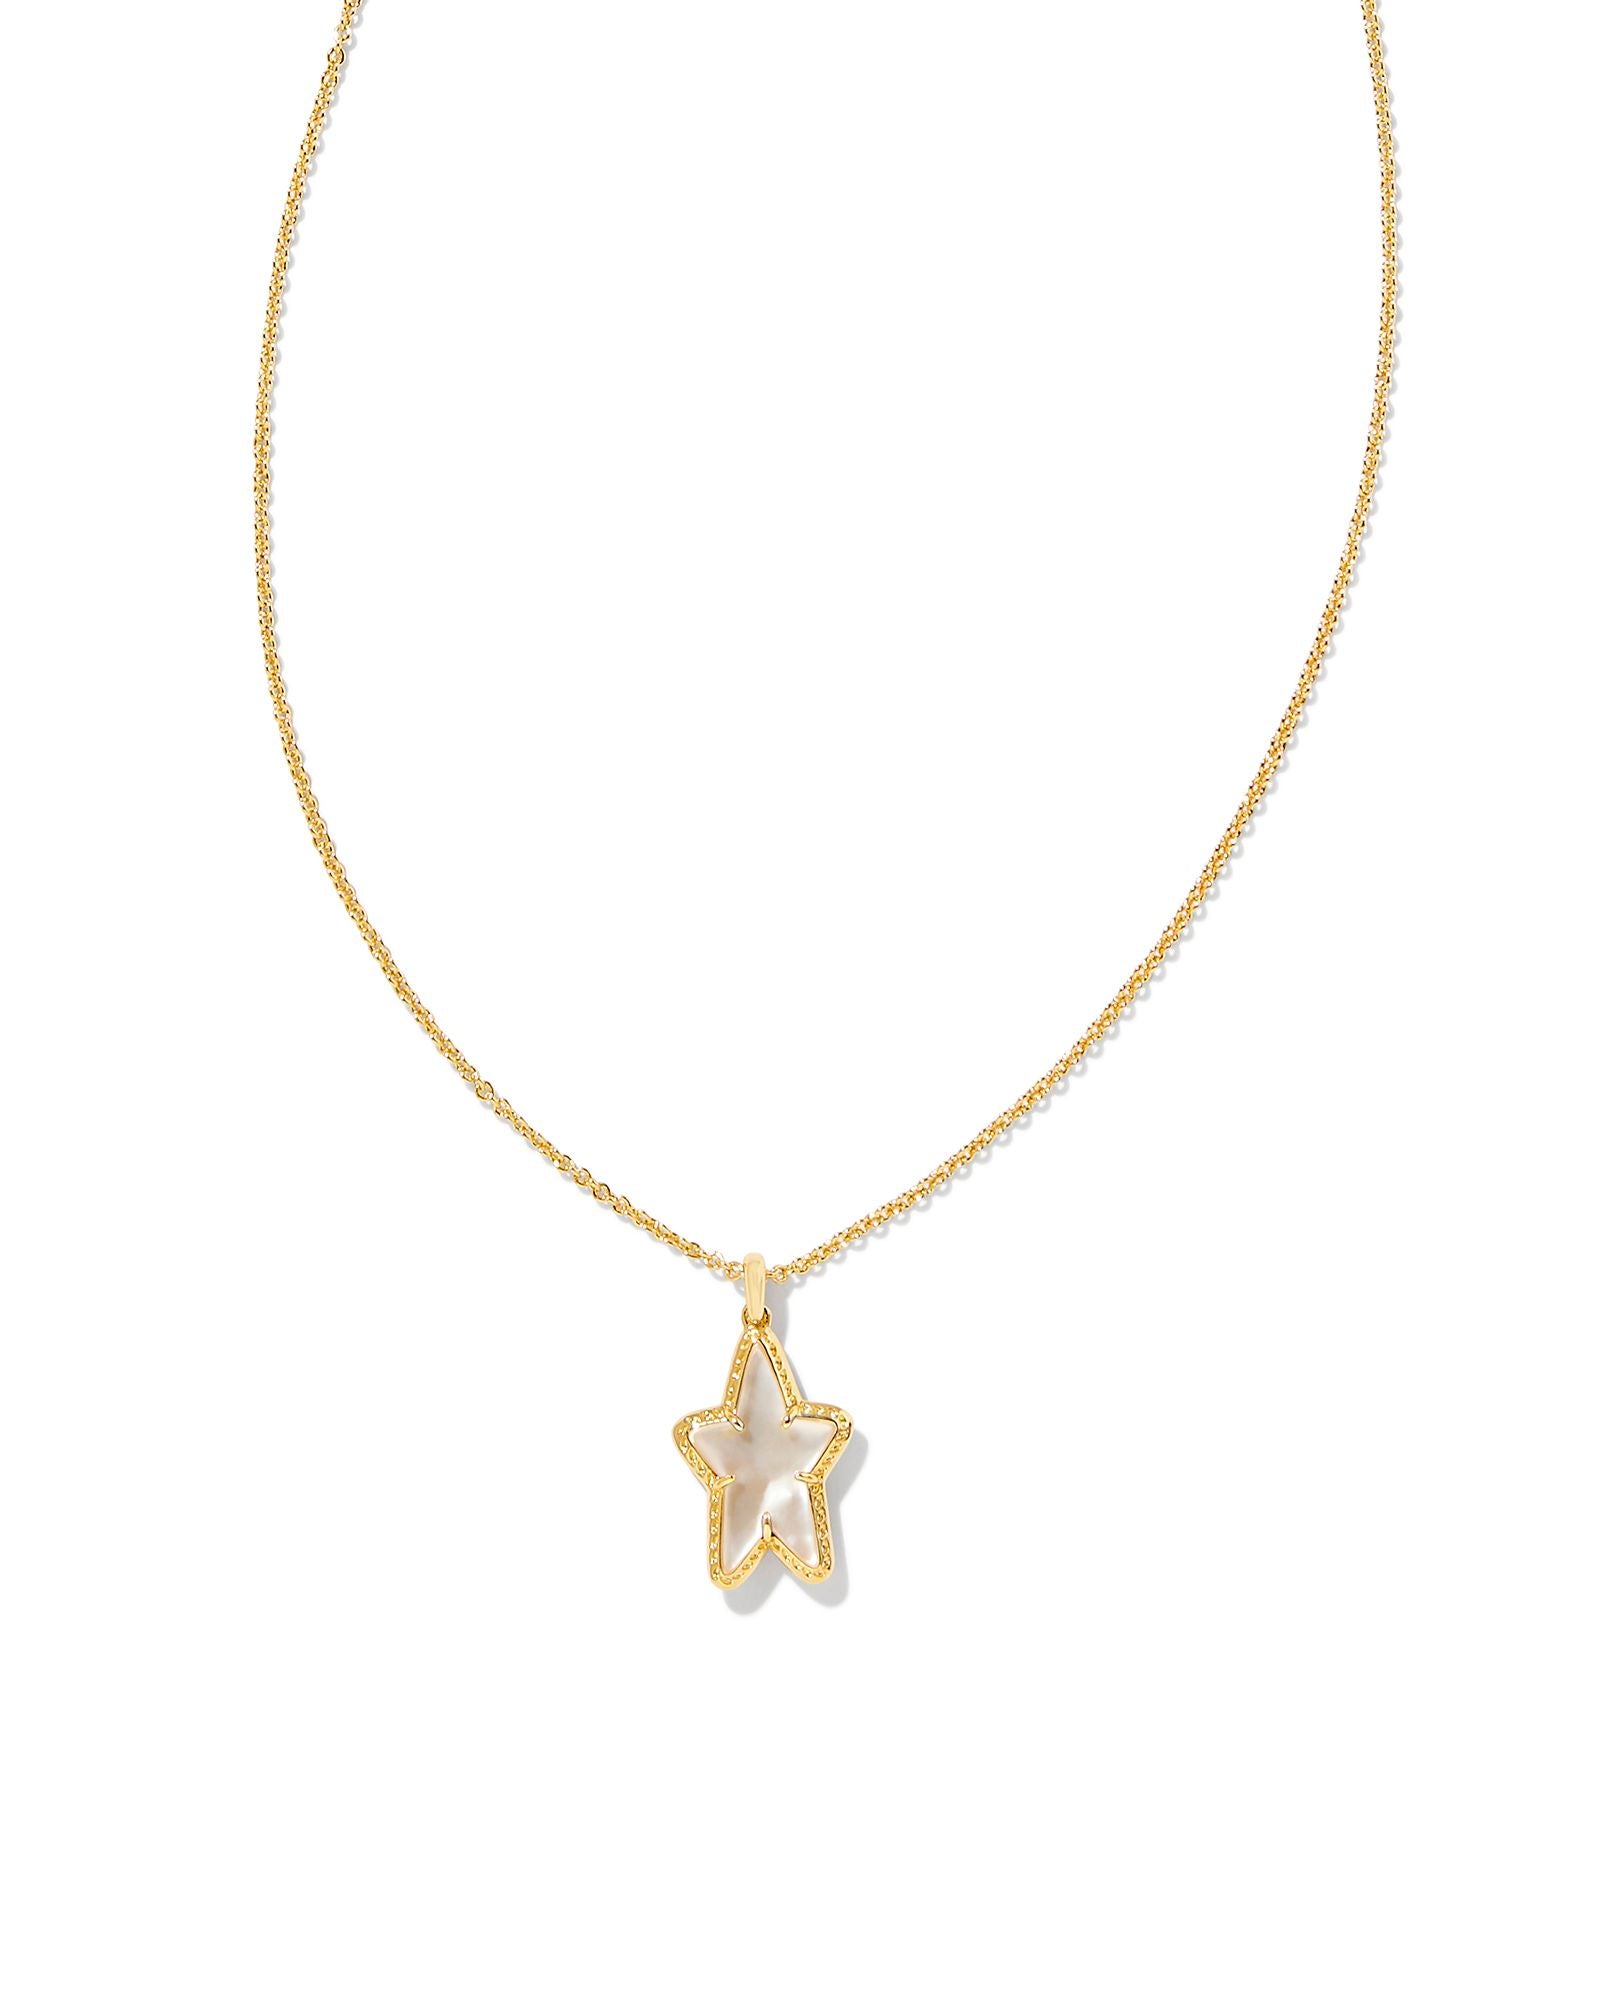 Ada Star Short Pendant Necklace in Gold Mother of Pearl